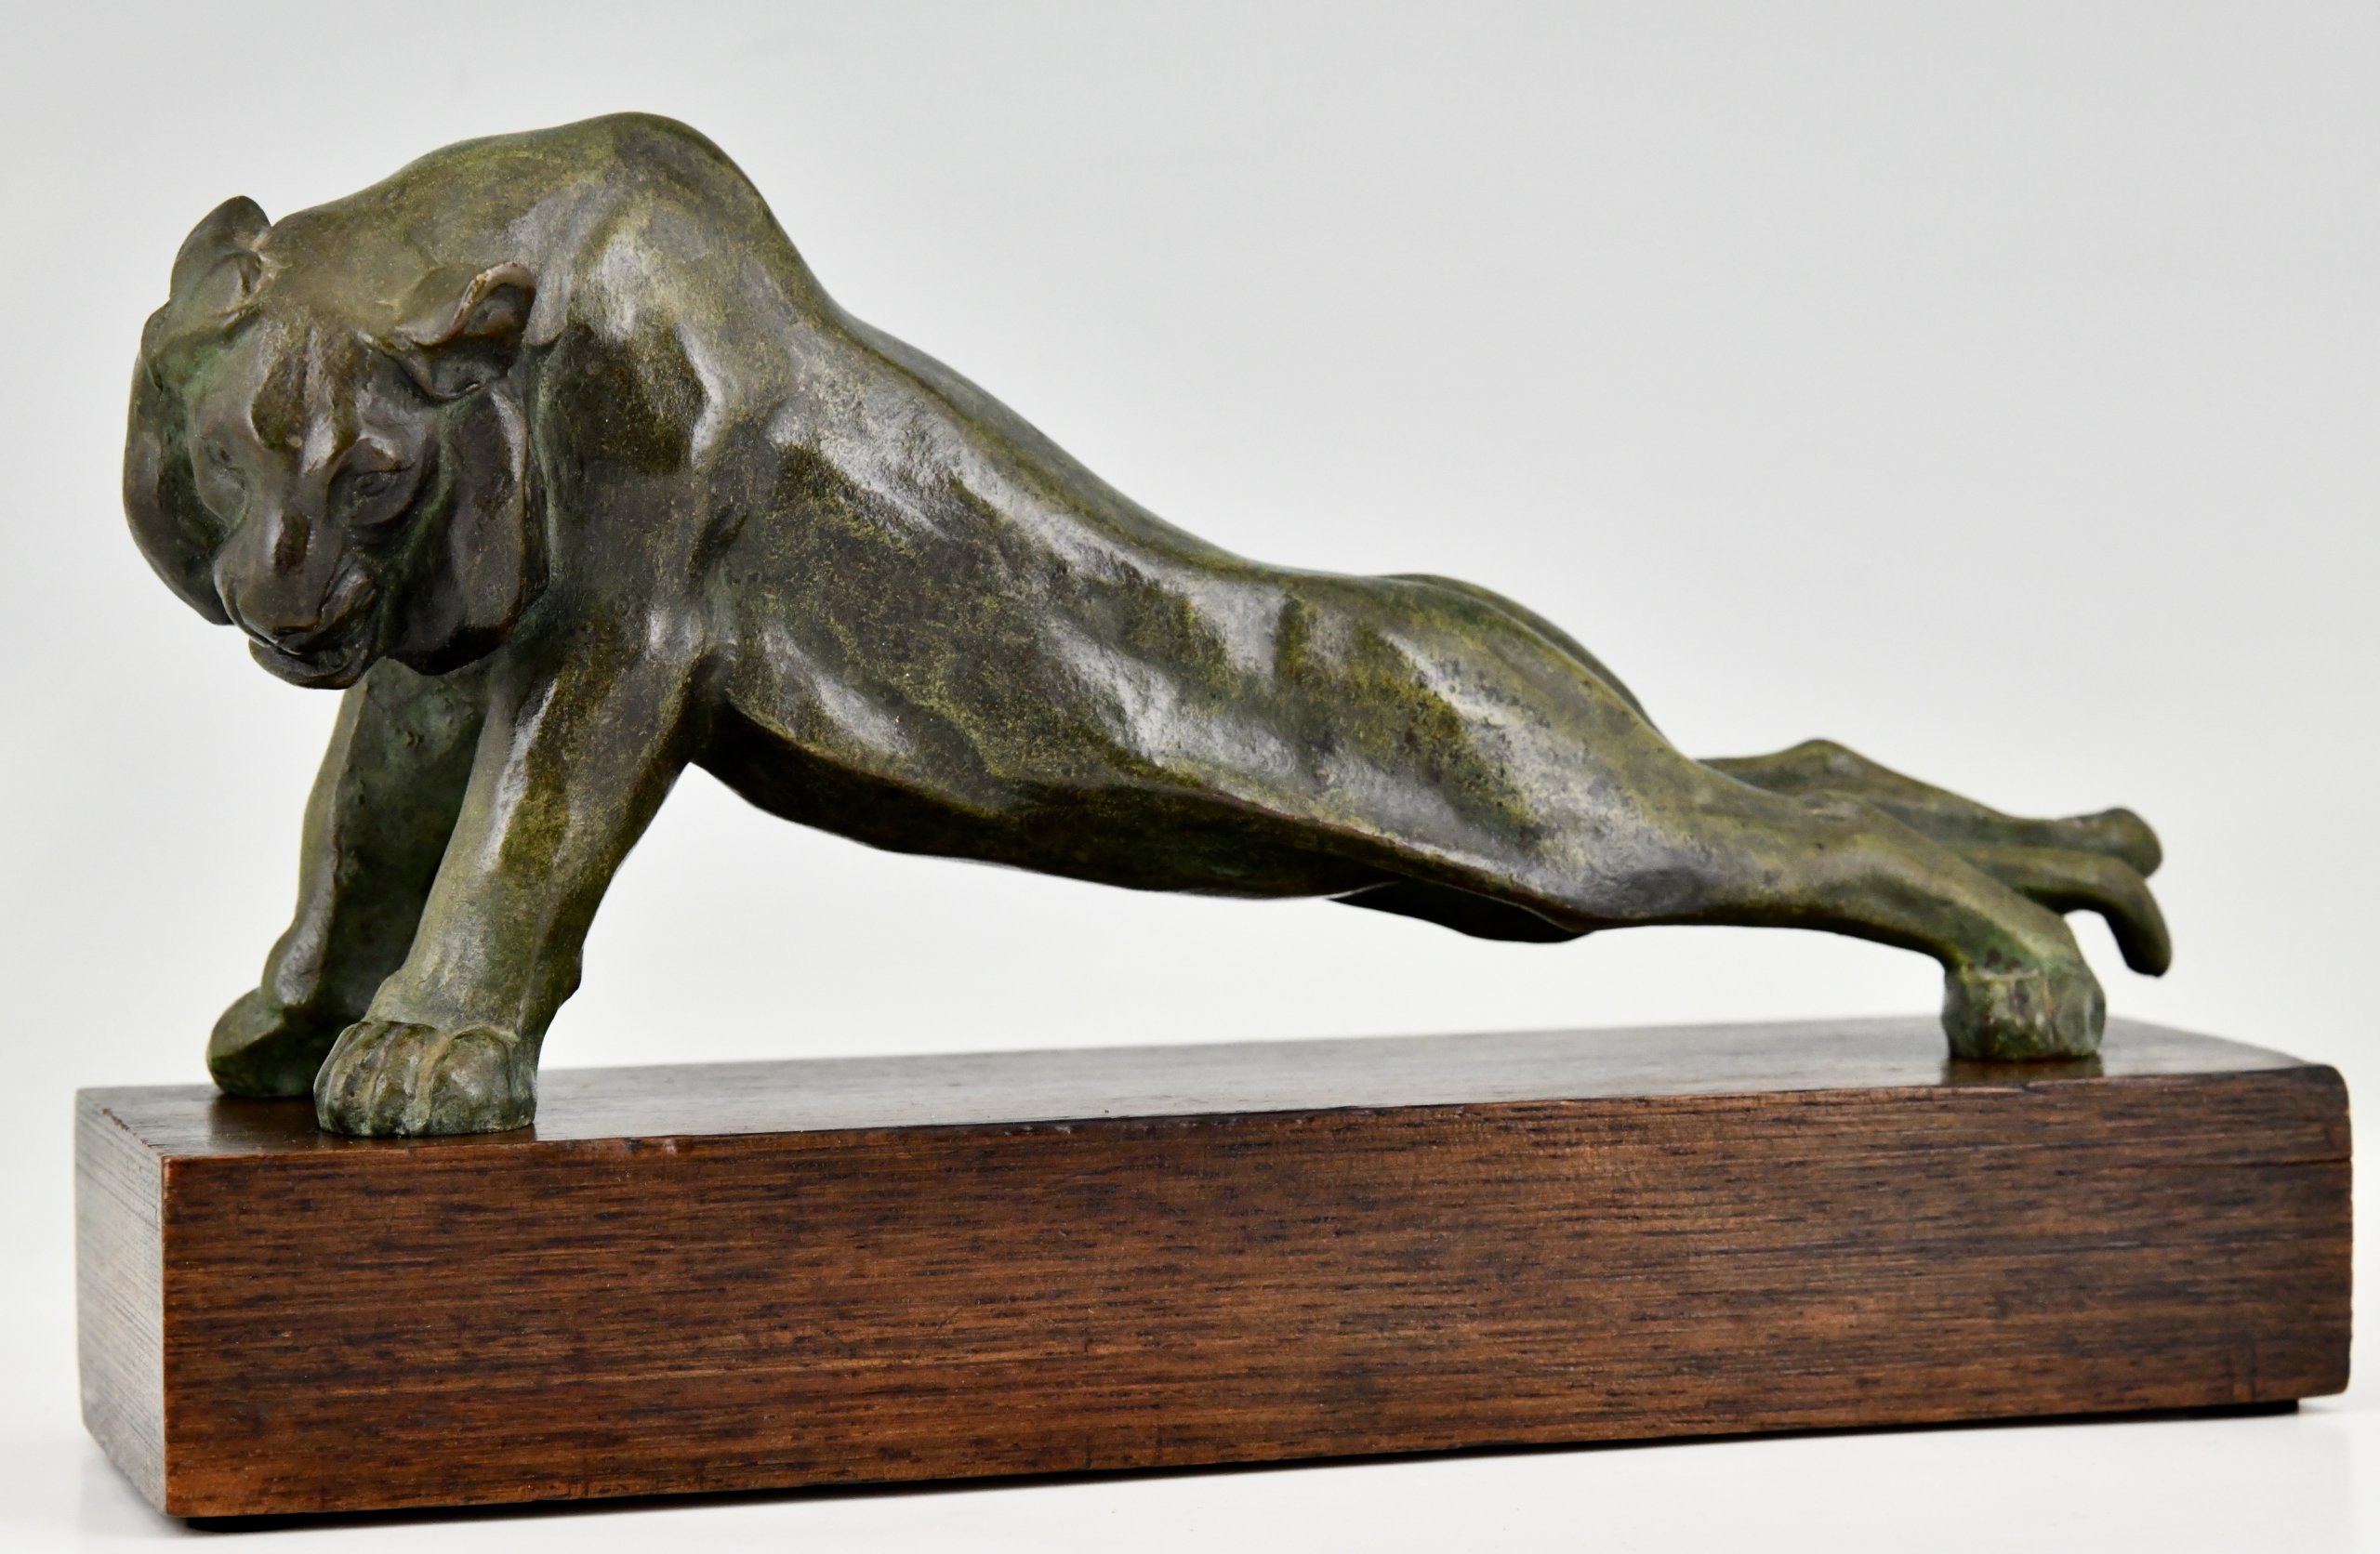 Art Deco bronze bookends panther and tiger.